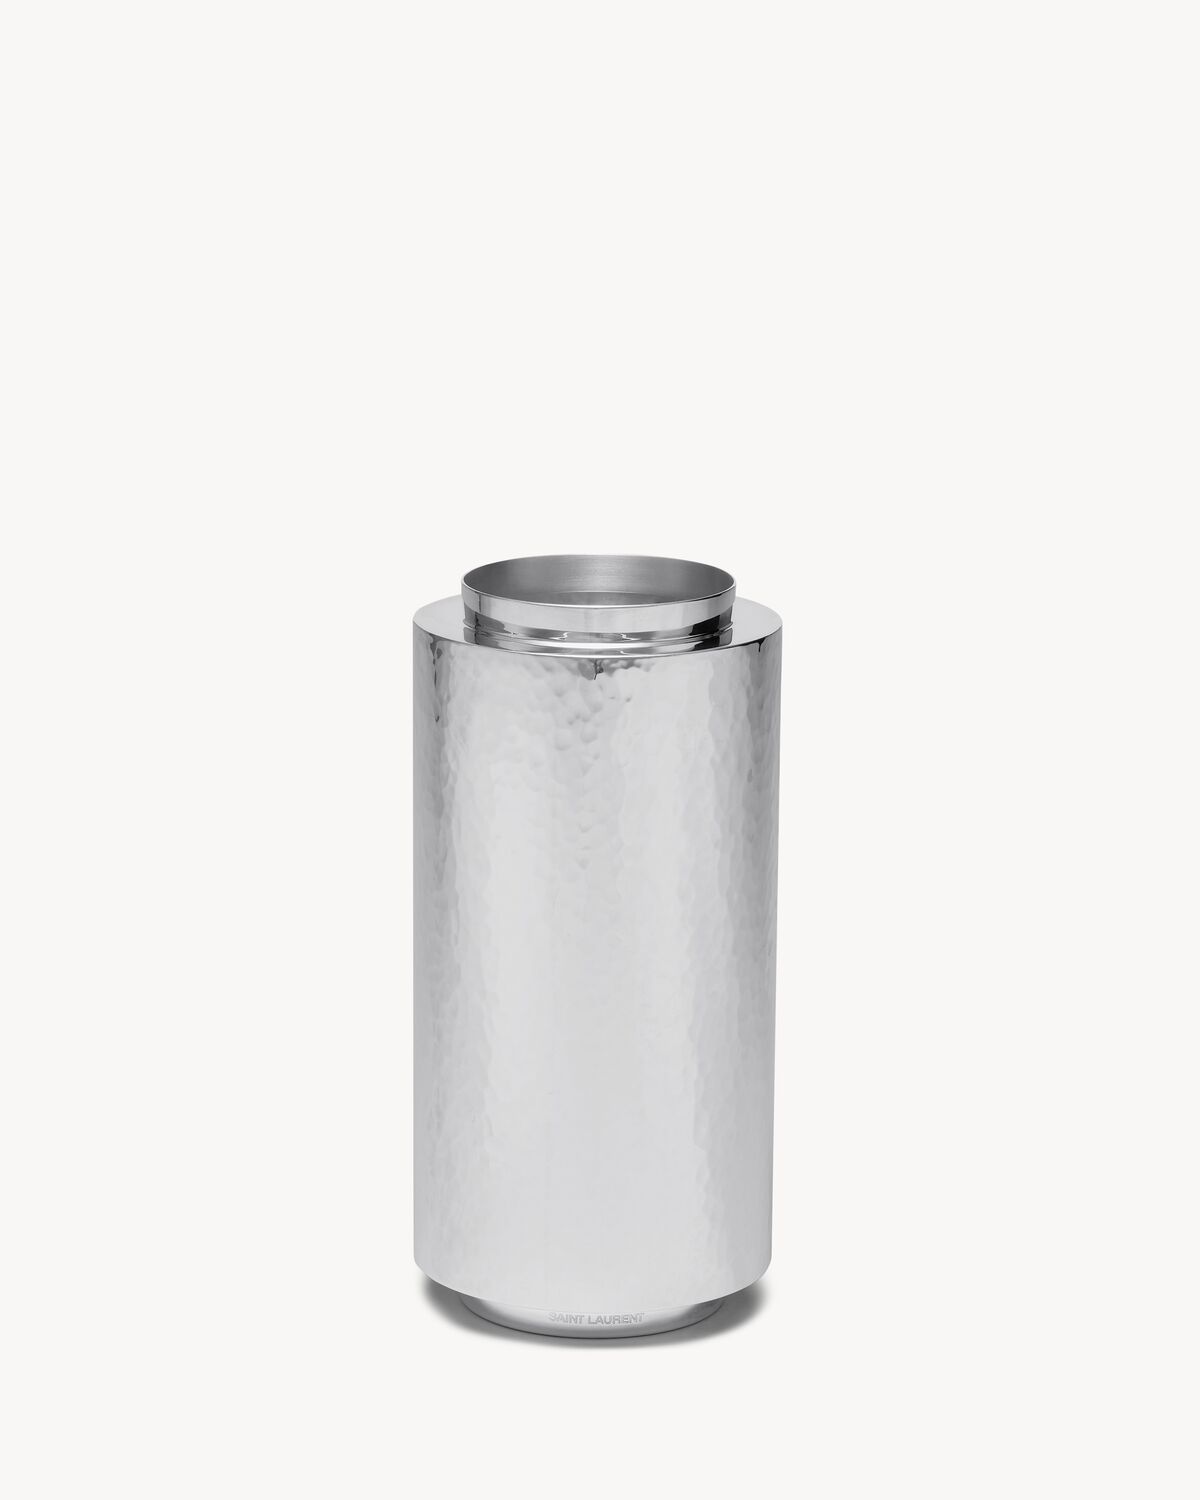 CYLINDRICAL VASE IN HAMMERED METAL